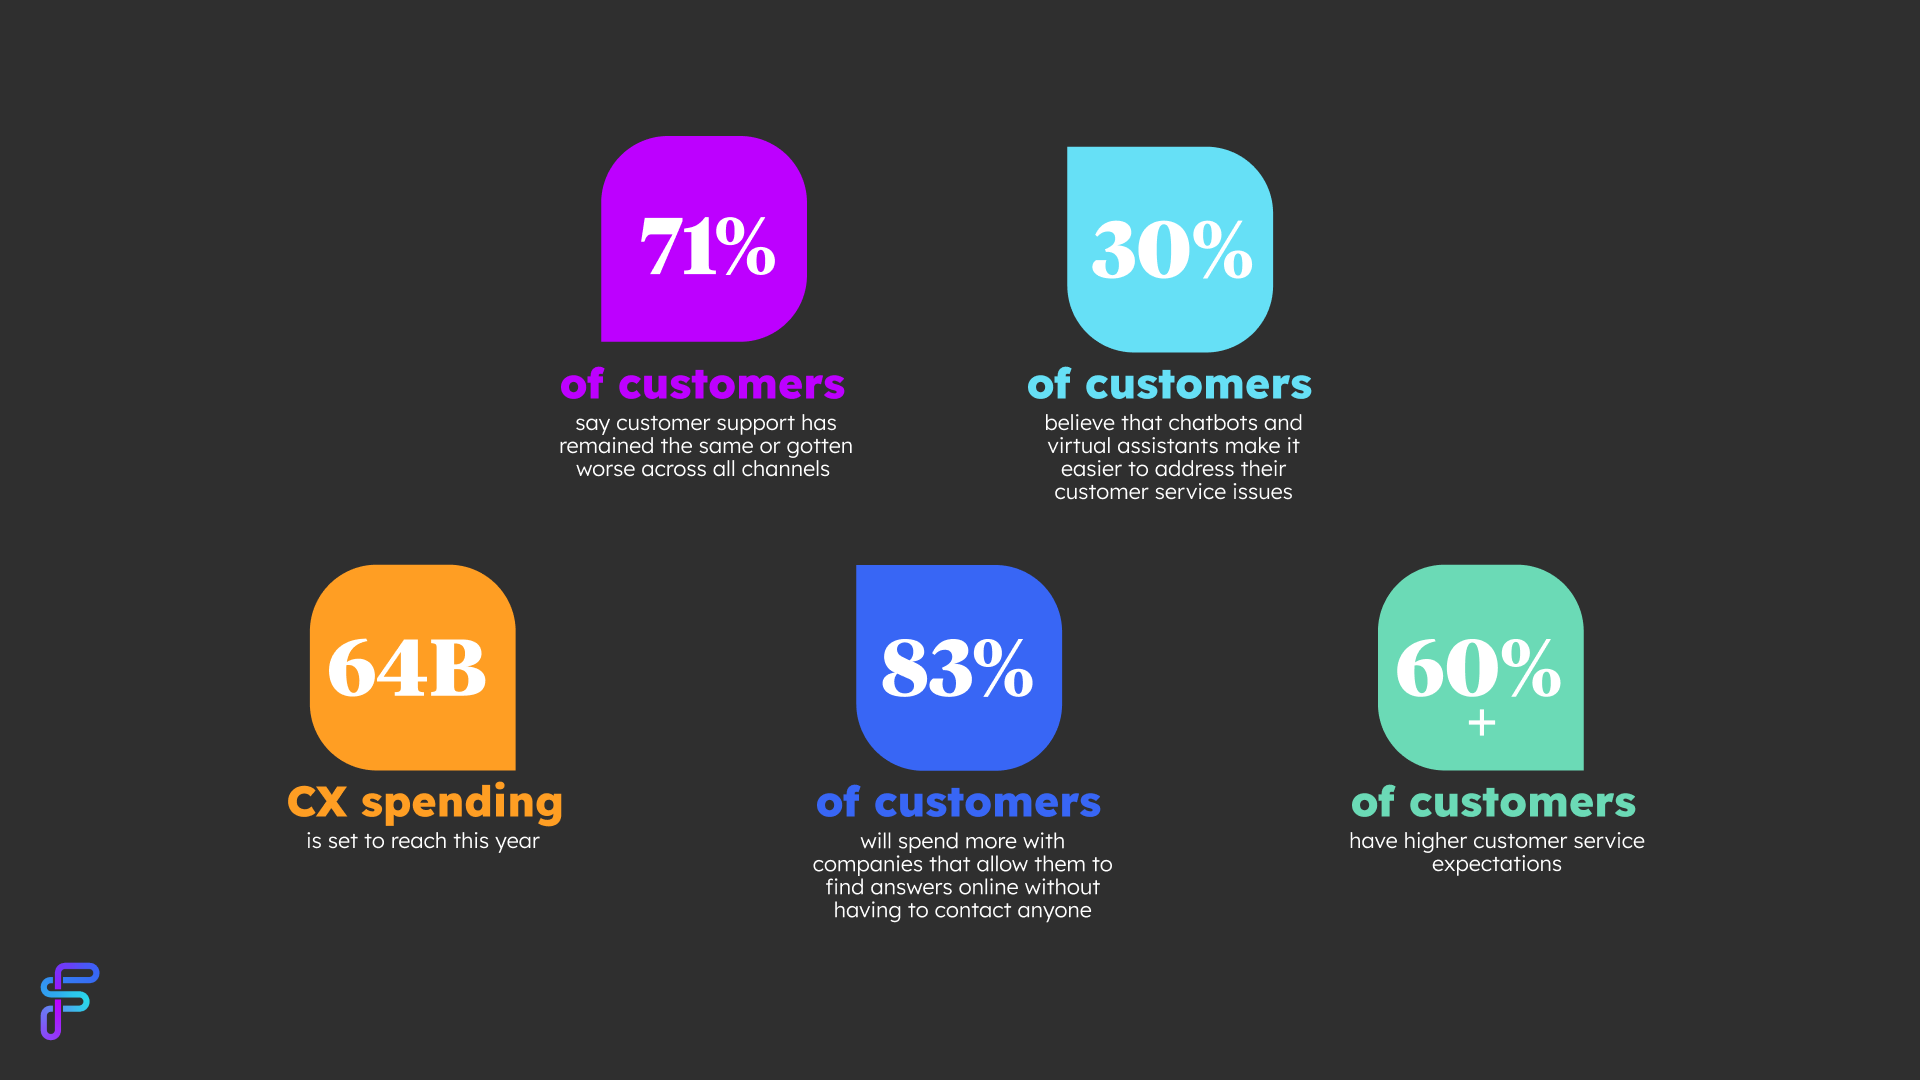 5 customer support stats about chatbots and AI.